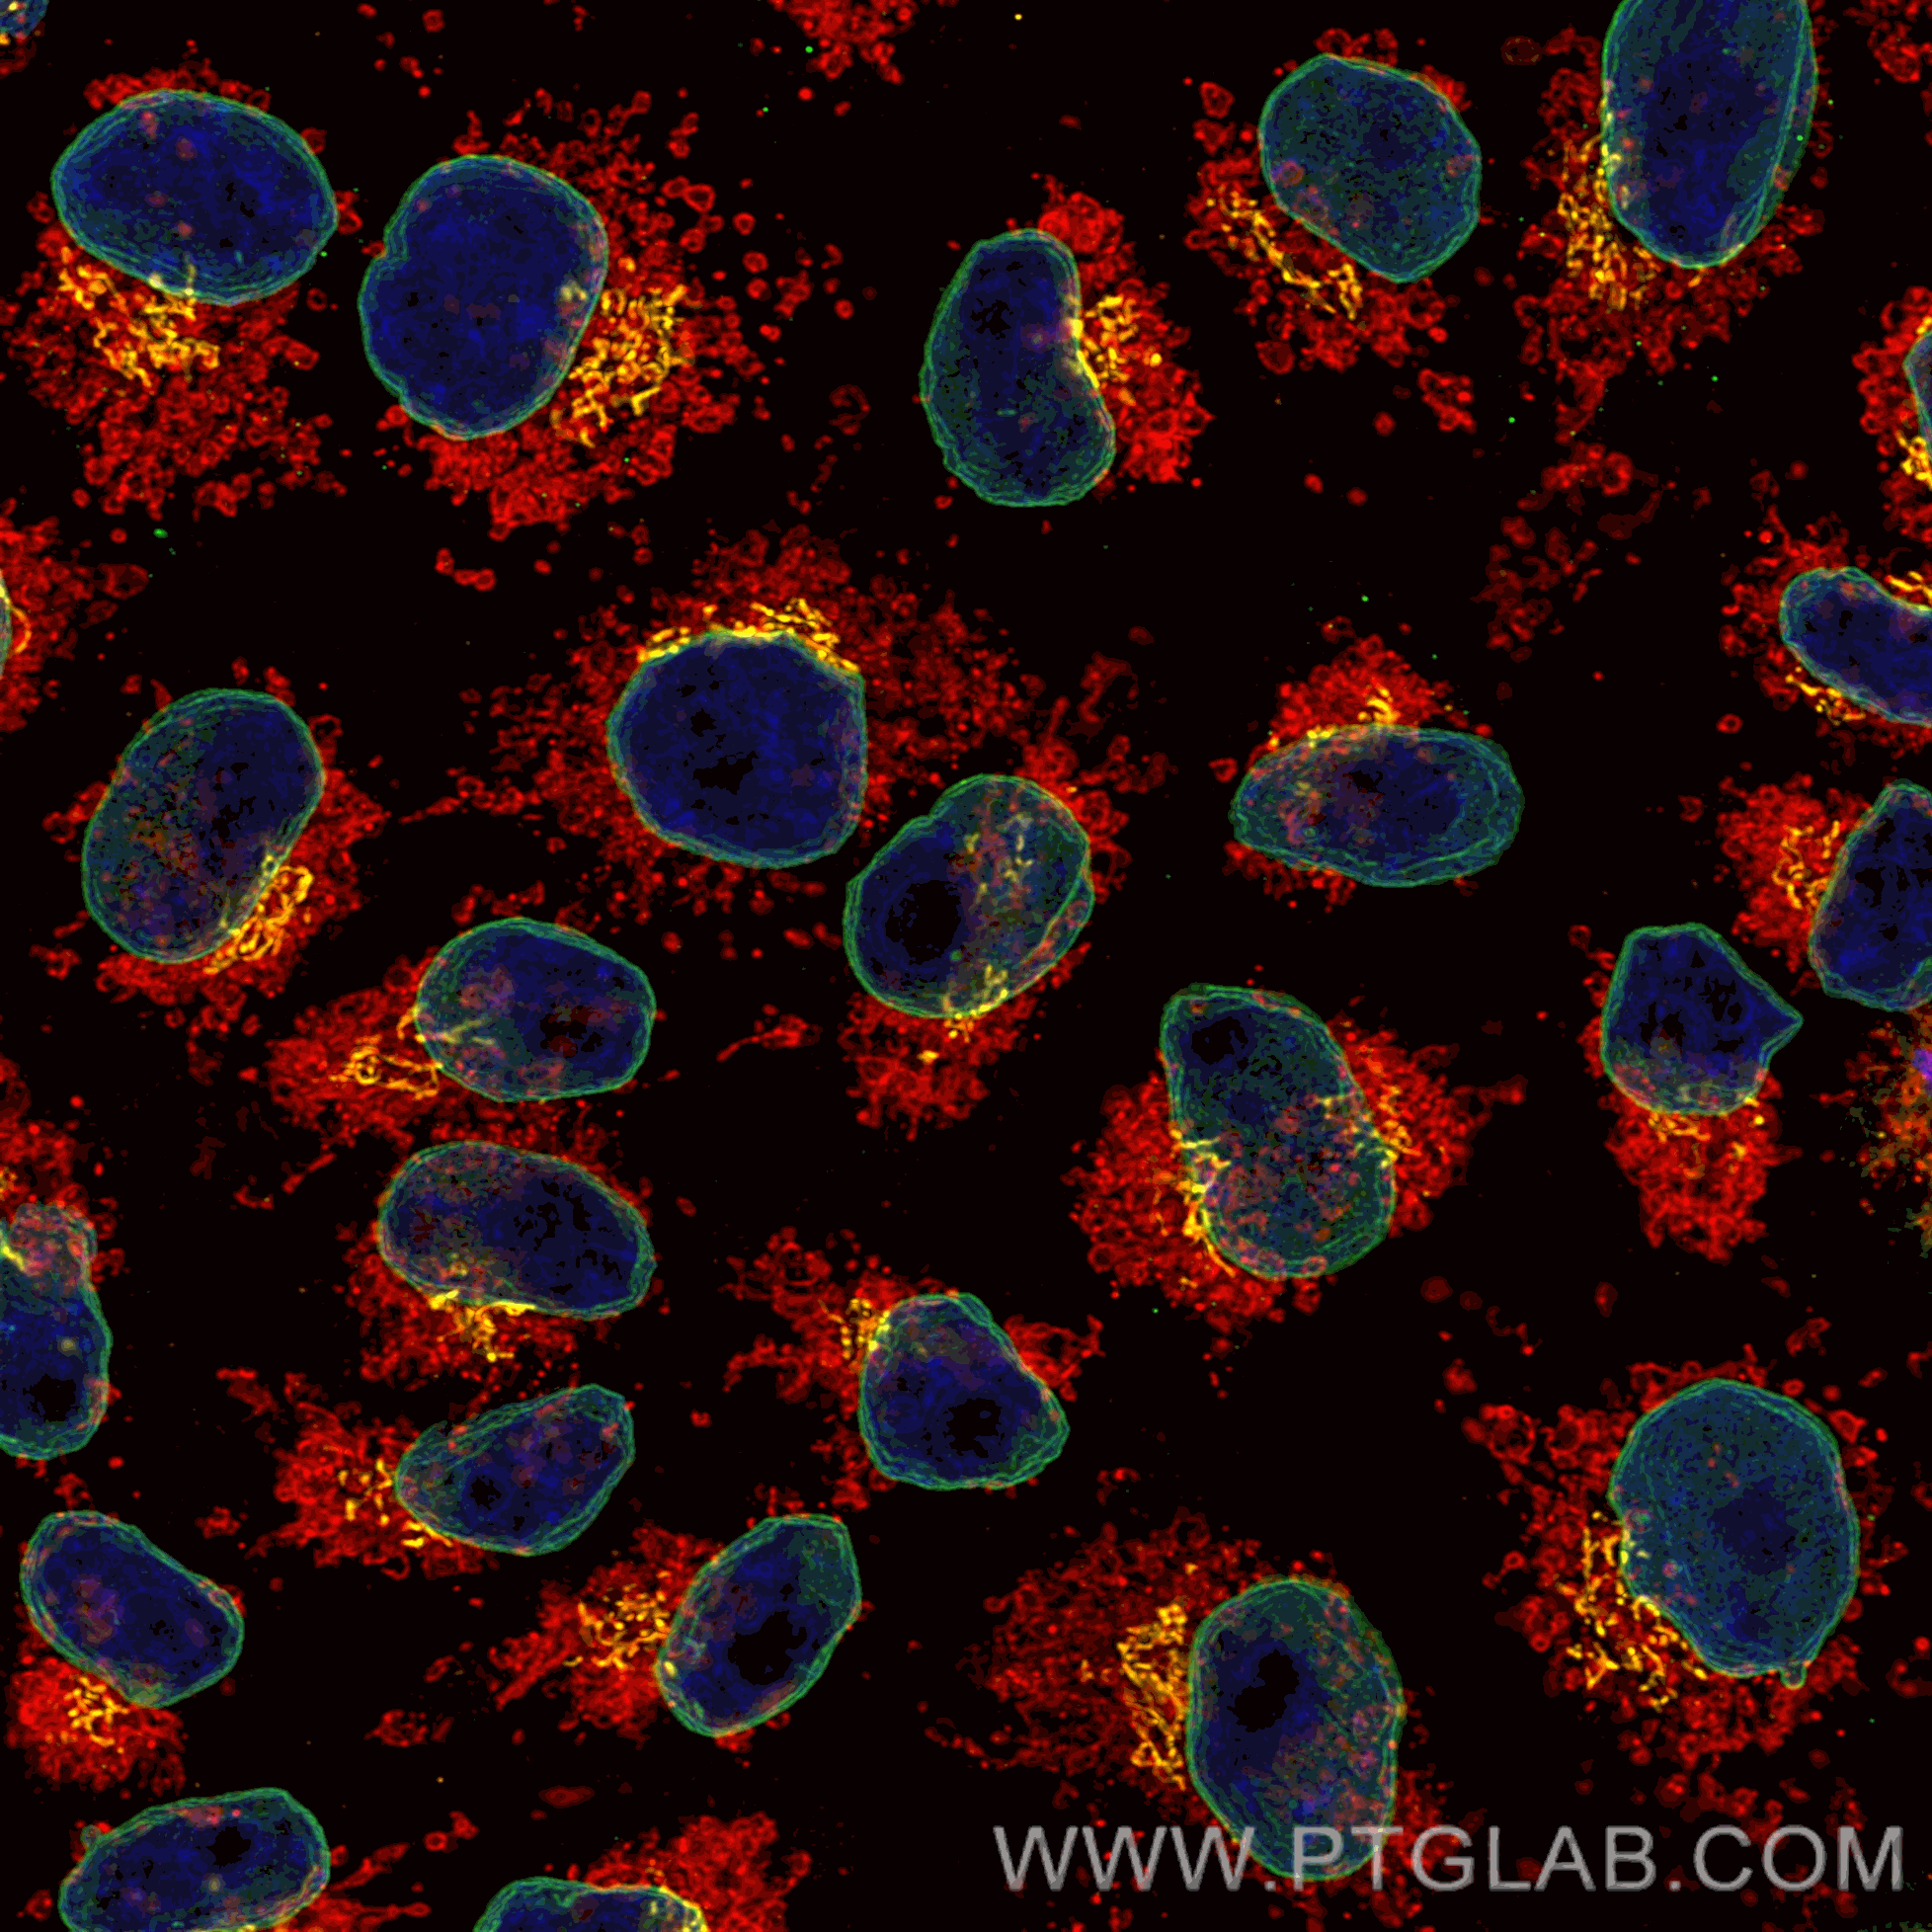 Immunofluorescence of HeLa: PFA-fixed HeLa cells were stained with anti-Lamin B1 antibody (12987-1-AP) followed by polyclonal goat anti-rabbit AF488 secondary antibody (green), anti-GM130 antibody (11308-1-AP) labeled with FlexAble Biotin Antibody Labeling Kit (KFA007) and Streptavidin-ATTO594​ (yellow), and anti-Tom20 antibody (11802-1-AP) separately labeled with FlexAble Biotin Antibody Labeling Kit (KFA007) and Streptavidin-AQ650 (red). Nuclei are stained with DAPI (blue).
Confocal images were acquired with a 100x oil objective and post-processed. Images were recorded at the Core Facility Bioimaging at the Biomedical Center, LMU Munich.